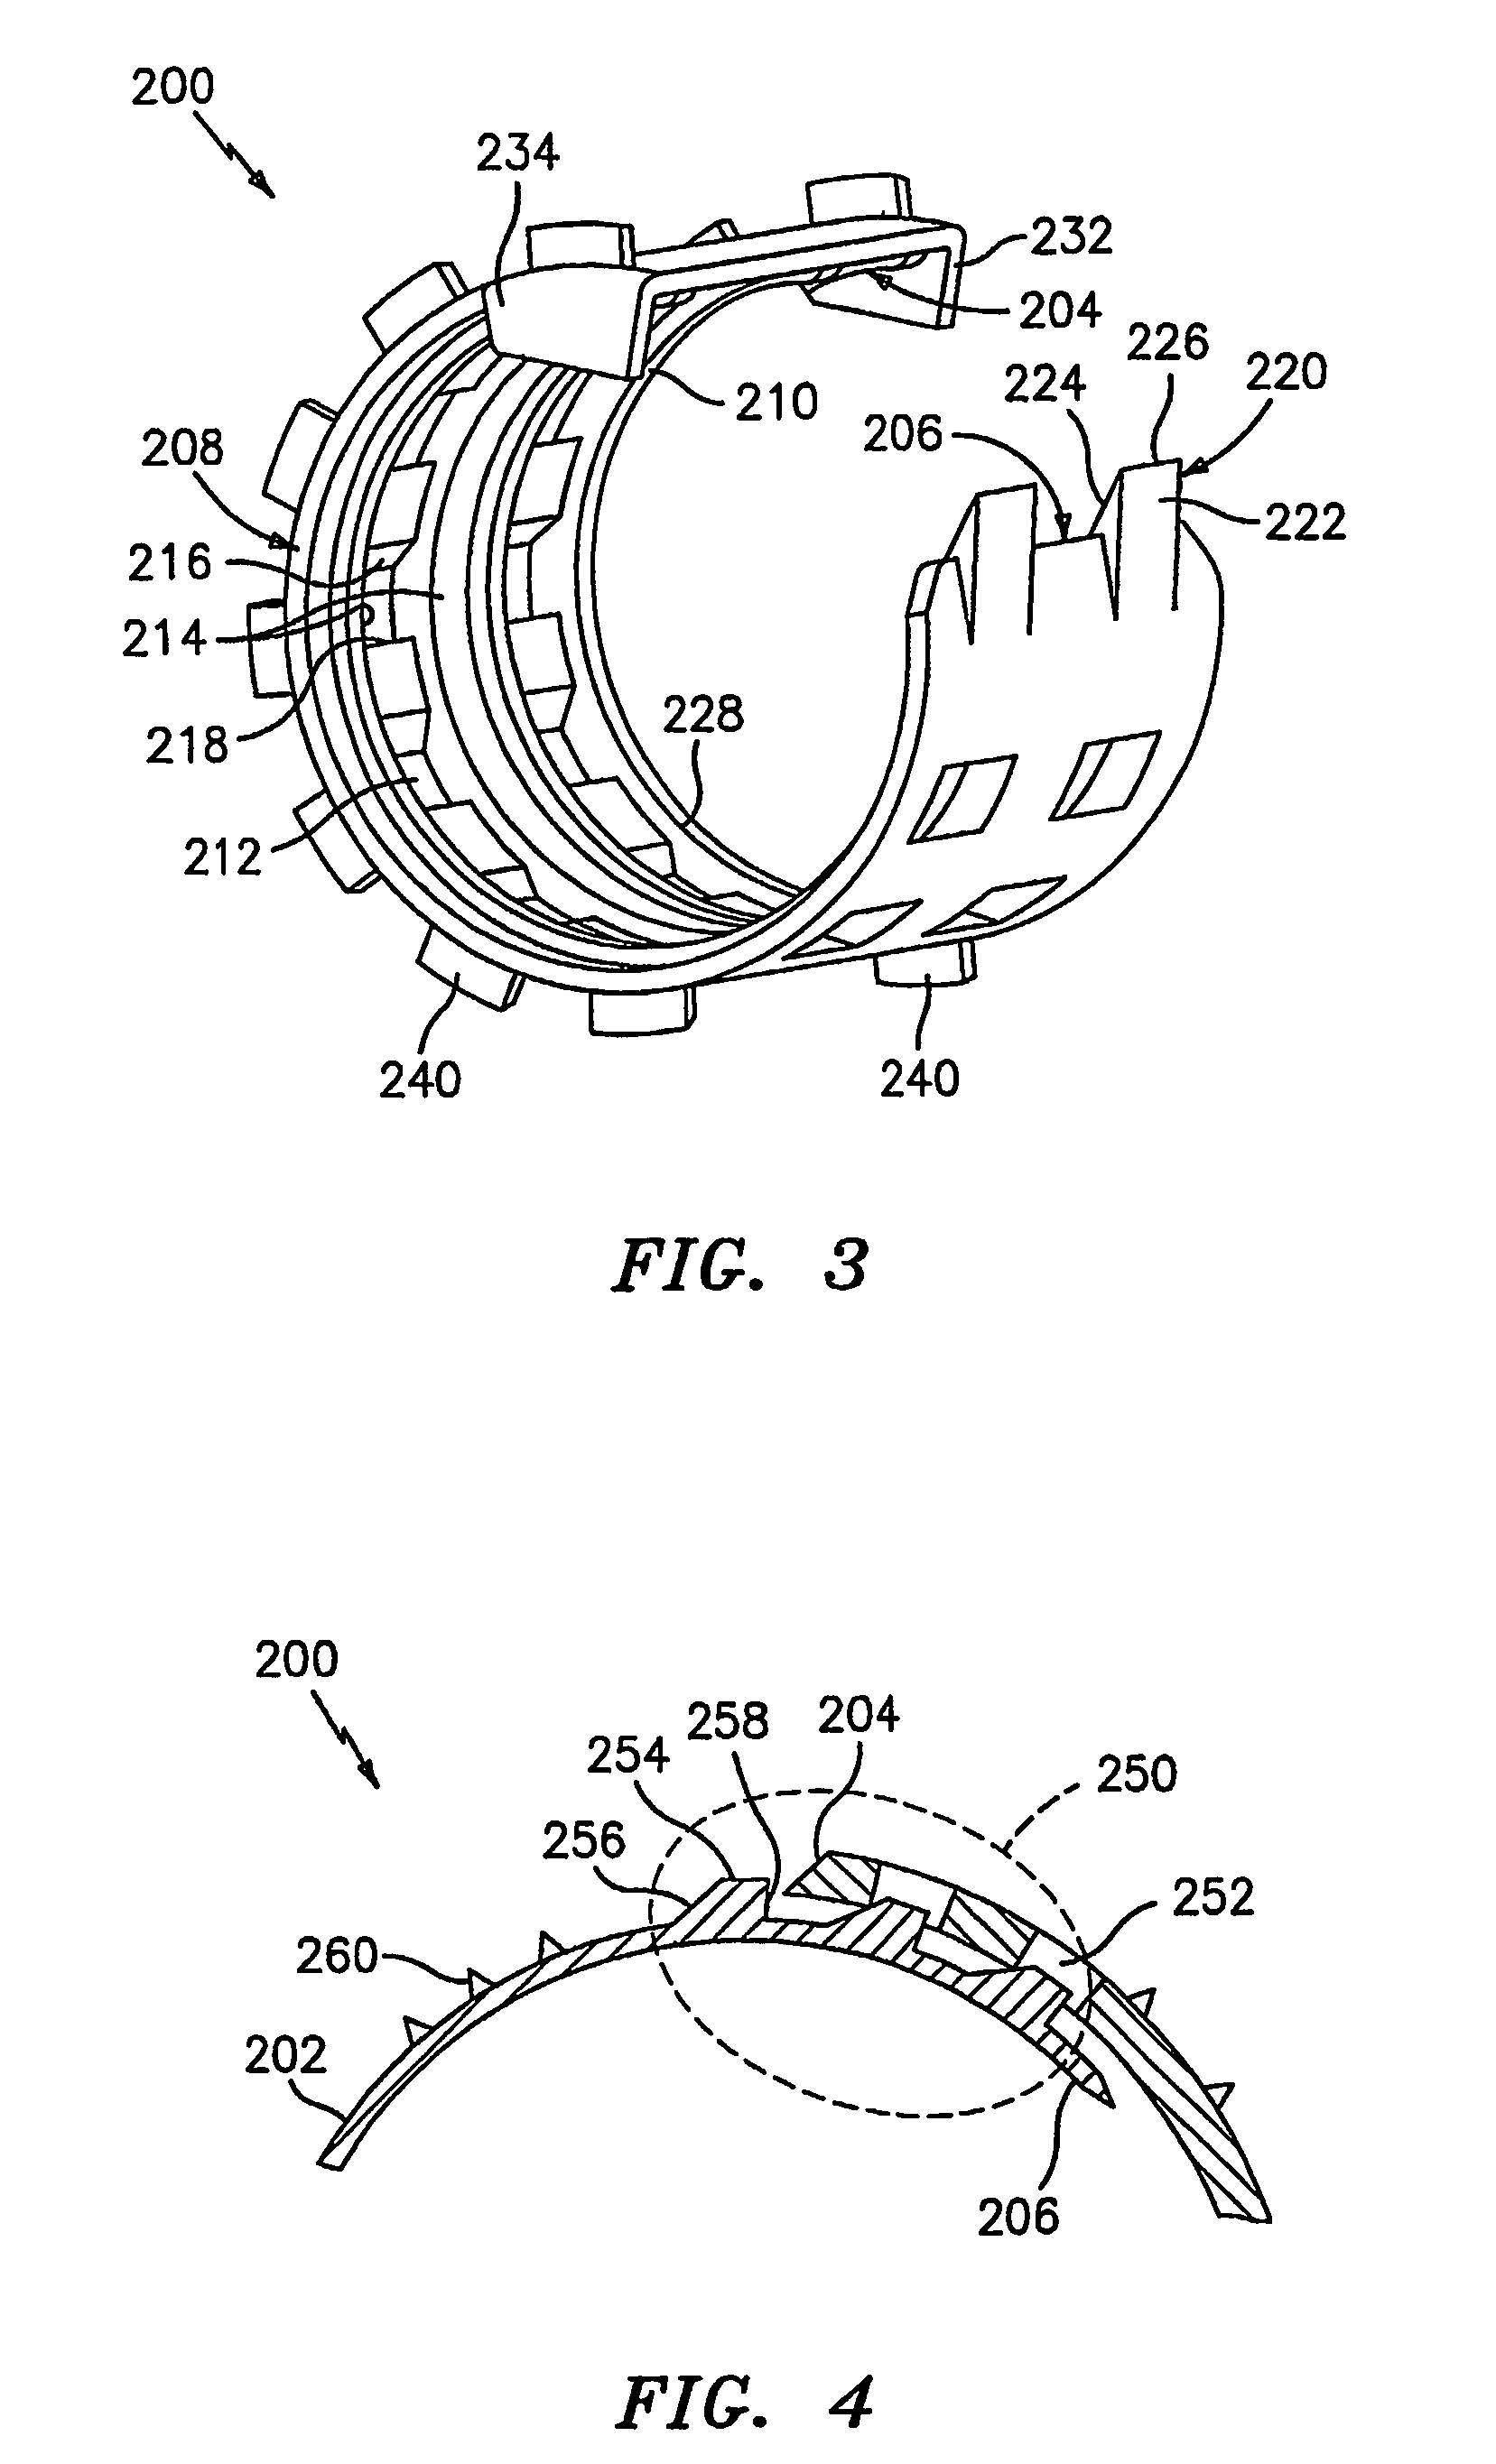 Method and apparatus for anastomosis including annular joining member